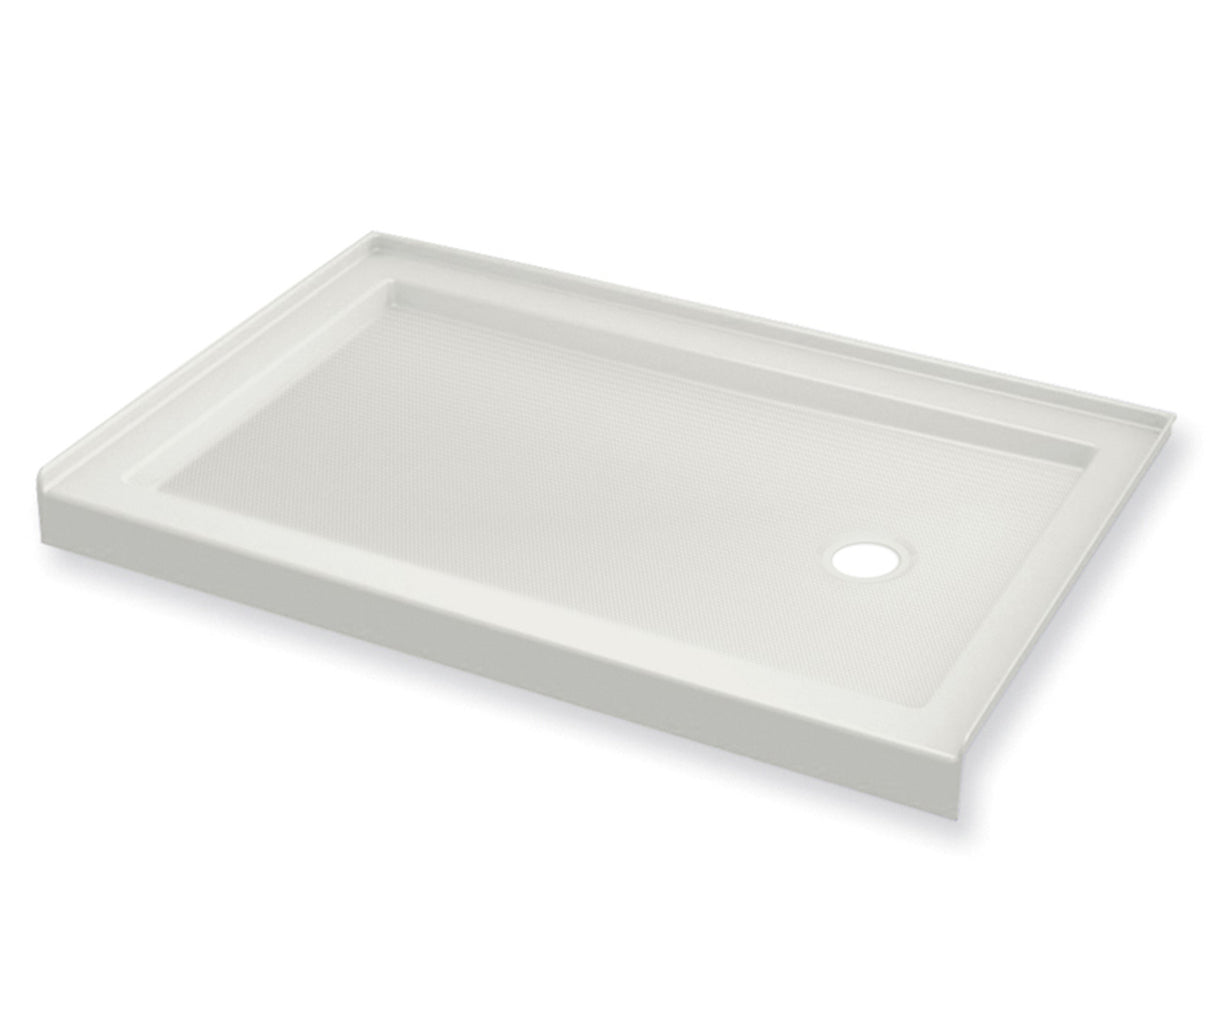 MAAX 410035-541-001-000 B3Round 6034 Acrylic Alcove Shower Base in White with Anti-slip Bottom with Center Drain